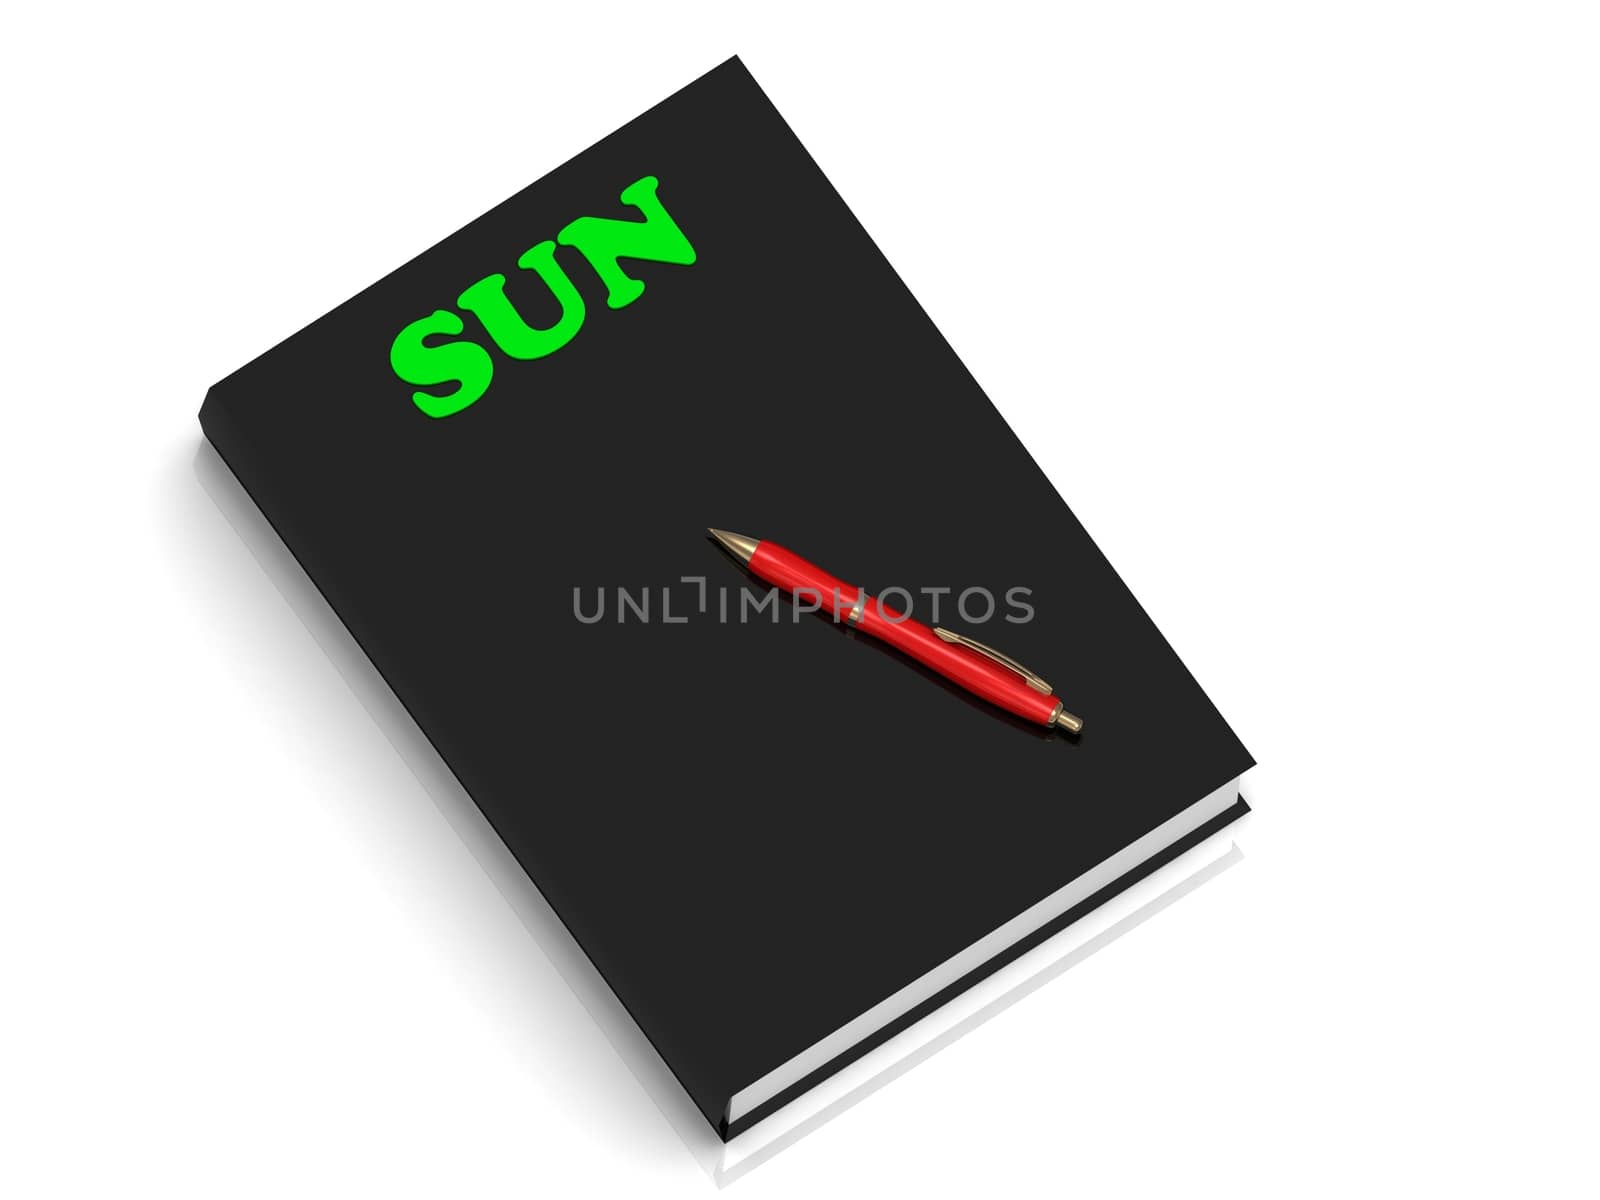 SUN- inscription of green letters on black book on white background